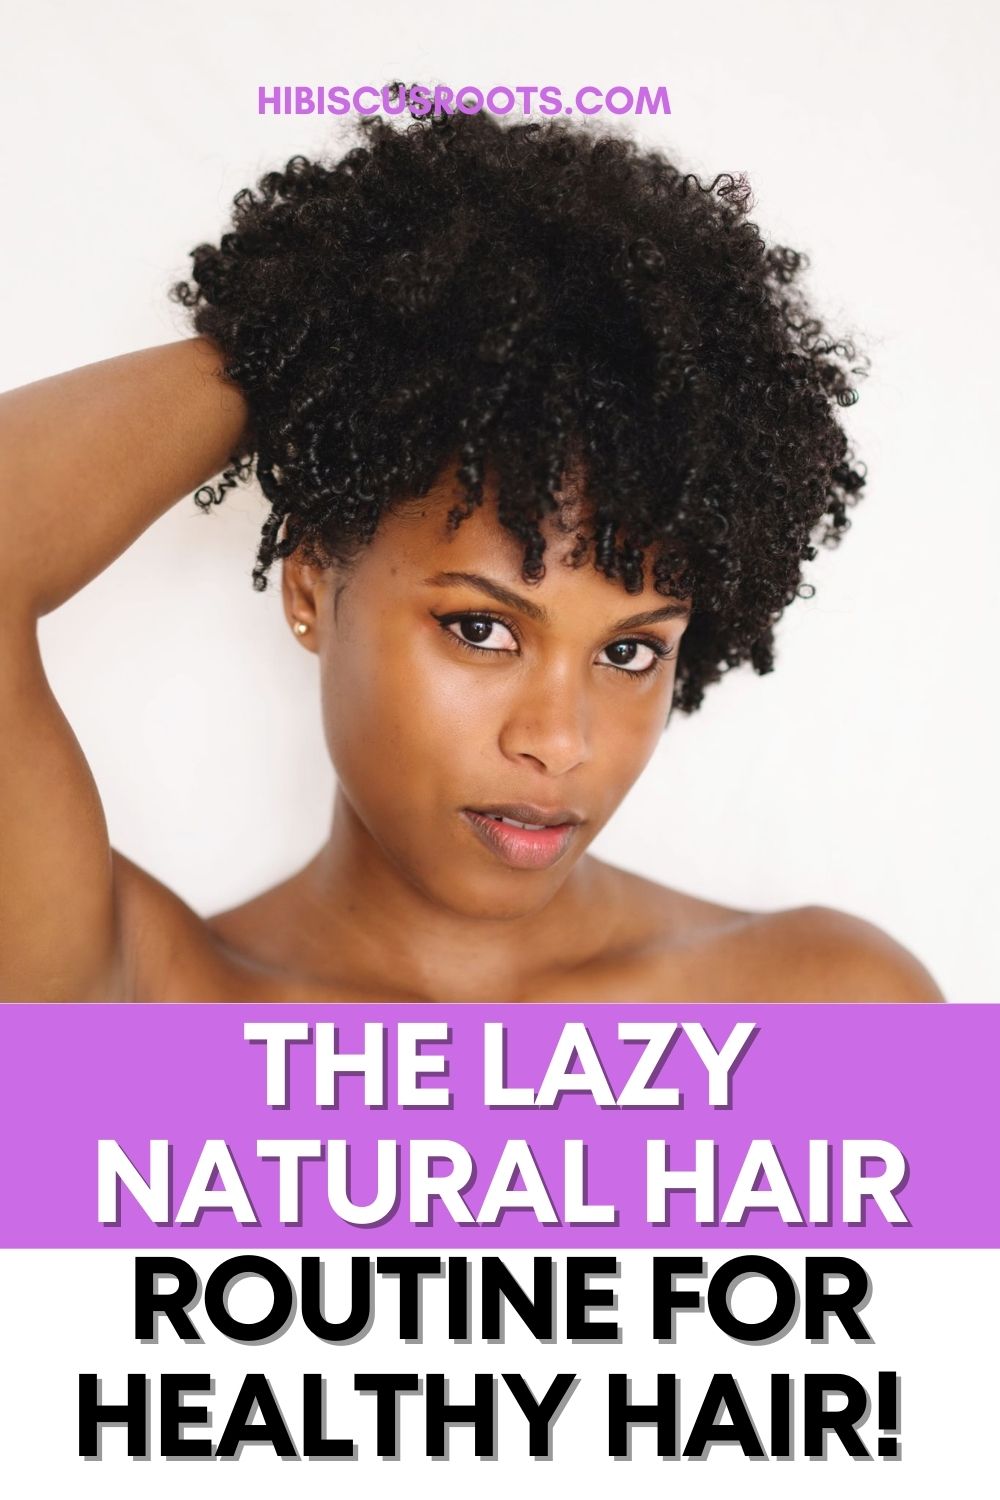 2-Week Easy Routine for Healthy 4C Natural Hair!